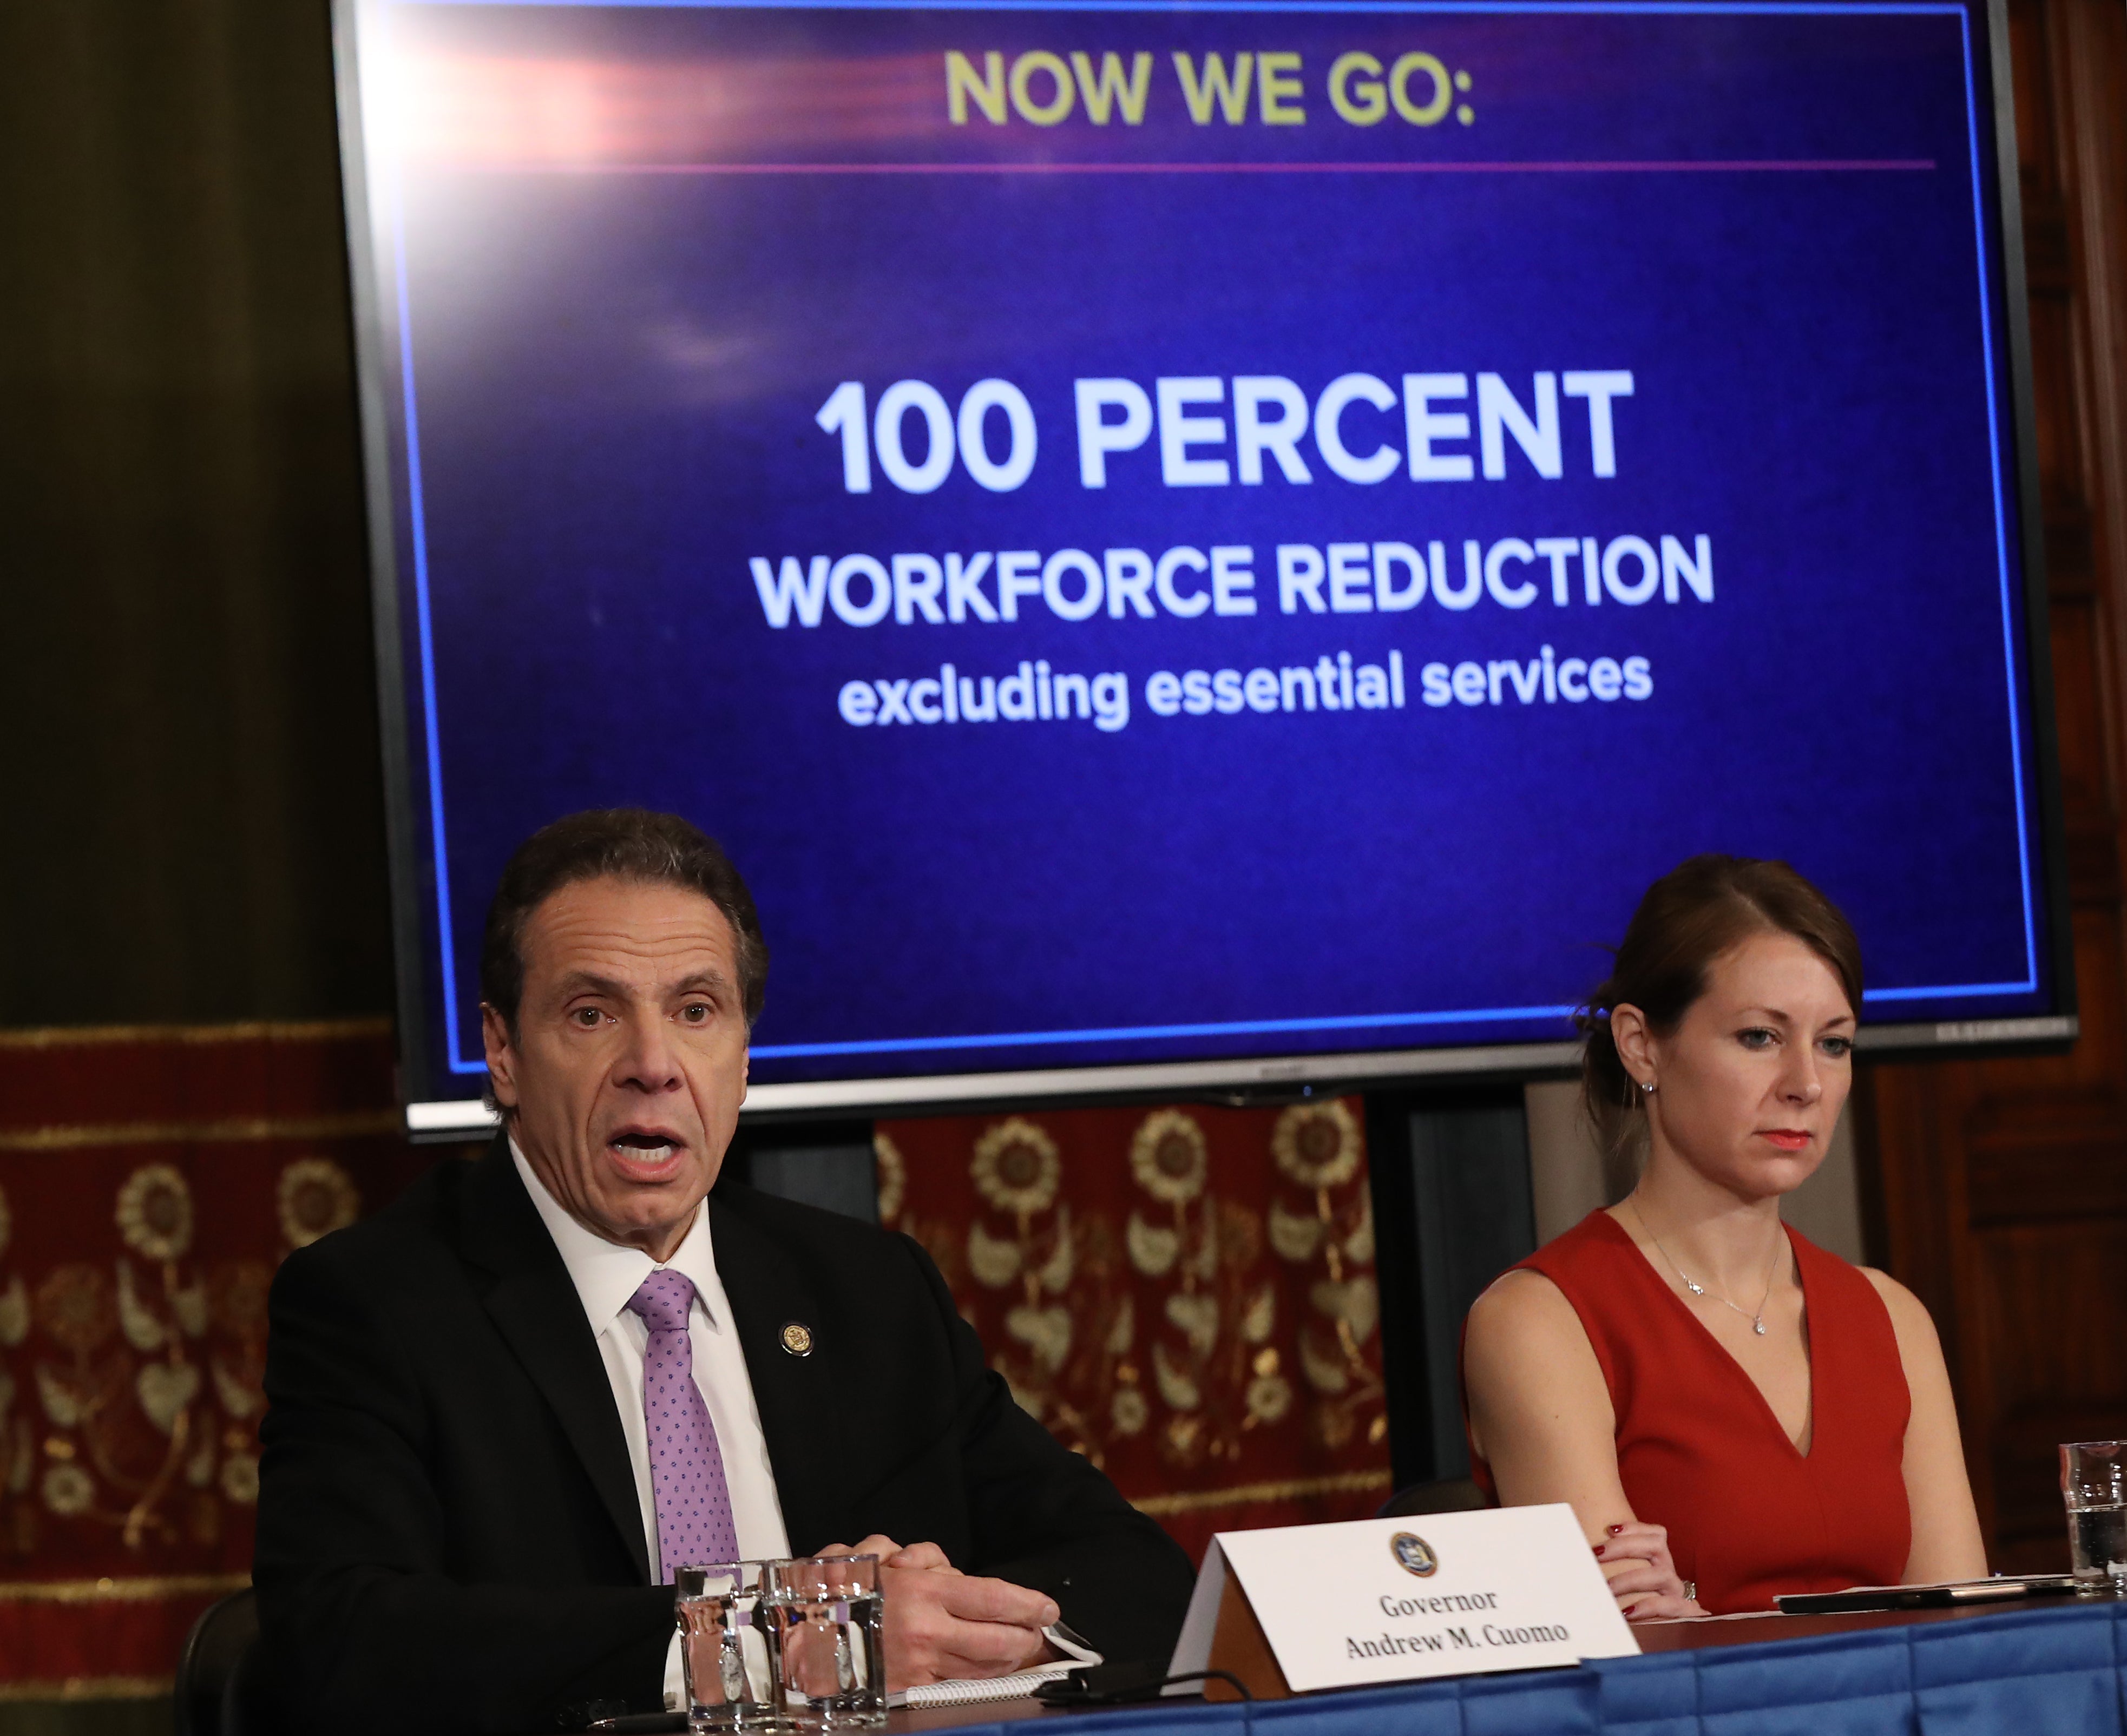 <p>File Image: New York Governor Andrew Cuomo (L) speaks during his daily news conference with Secretary to the Governor Melissa DeRosa (R) on 20 March 2020 in New York City.</p>